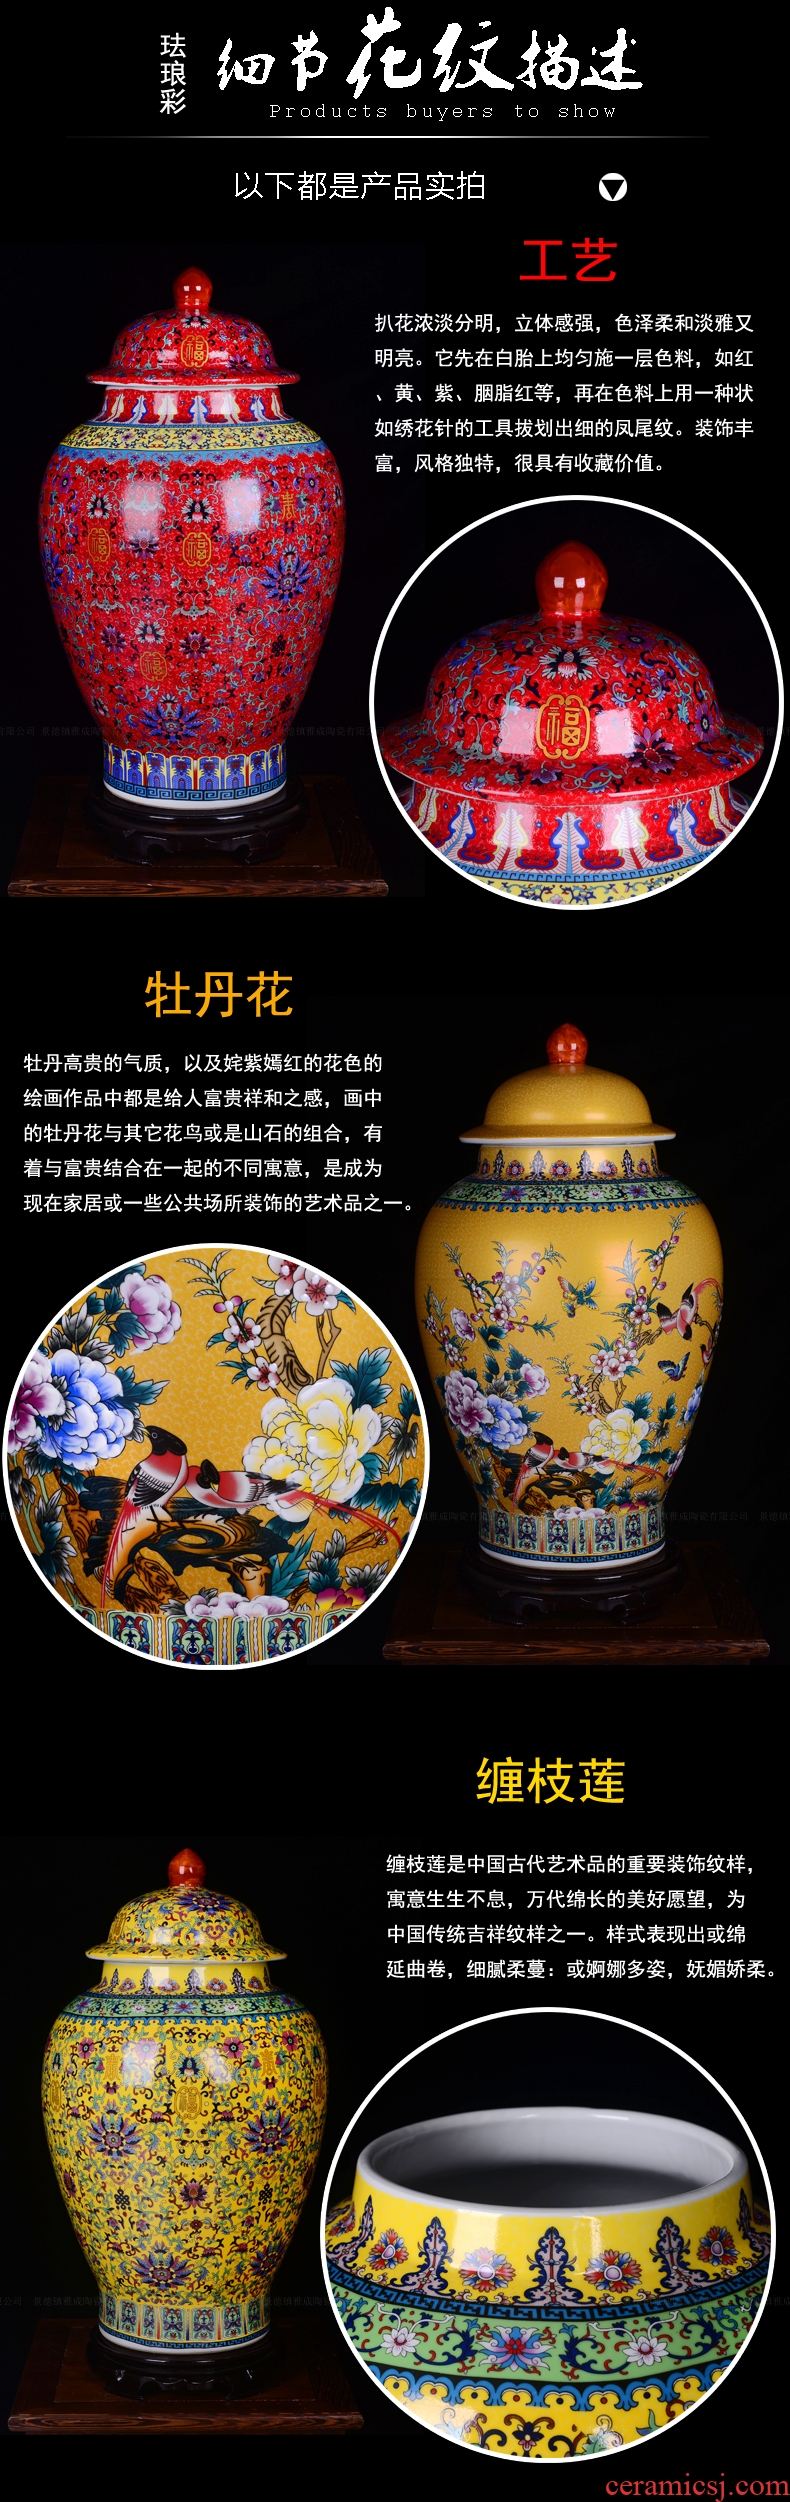 Jingdezhen ceramic big vase furnishing articles hand - made Chinese blue and white porcelain is a sitting room be born heavy adornment hotel decoration - 521880604586